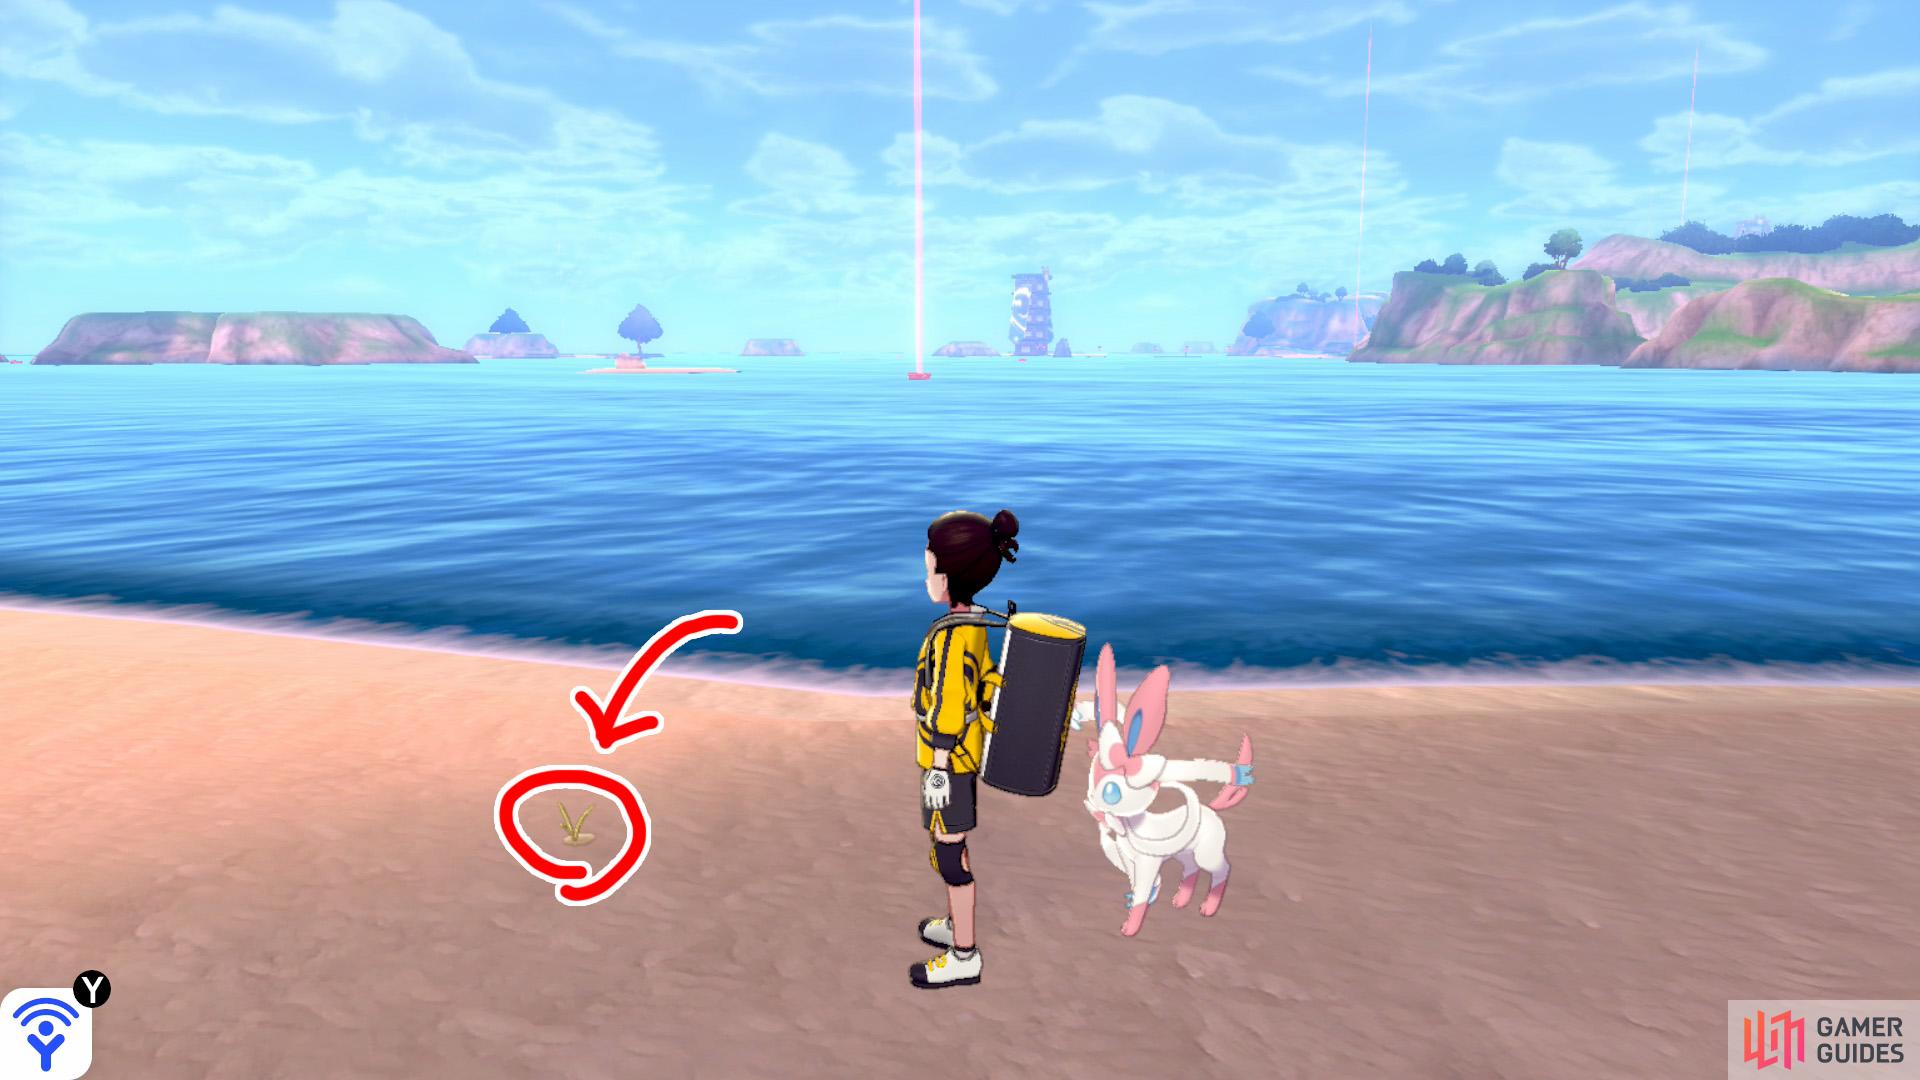 7/7: From the islet where Diglett 5 and 6 are, turn so the mainland is on your left. Directly, there's a long, sandy island with a boulder on one end and a Pokémon Den on the other. Swim towards that island. Check around the middle of this island.